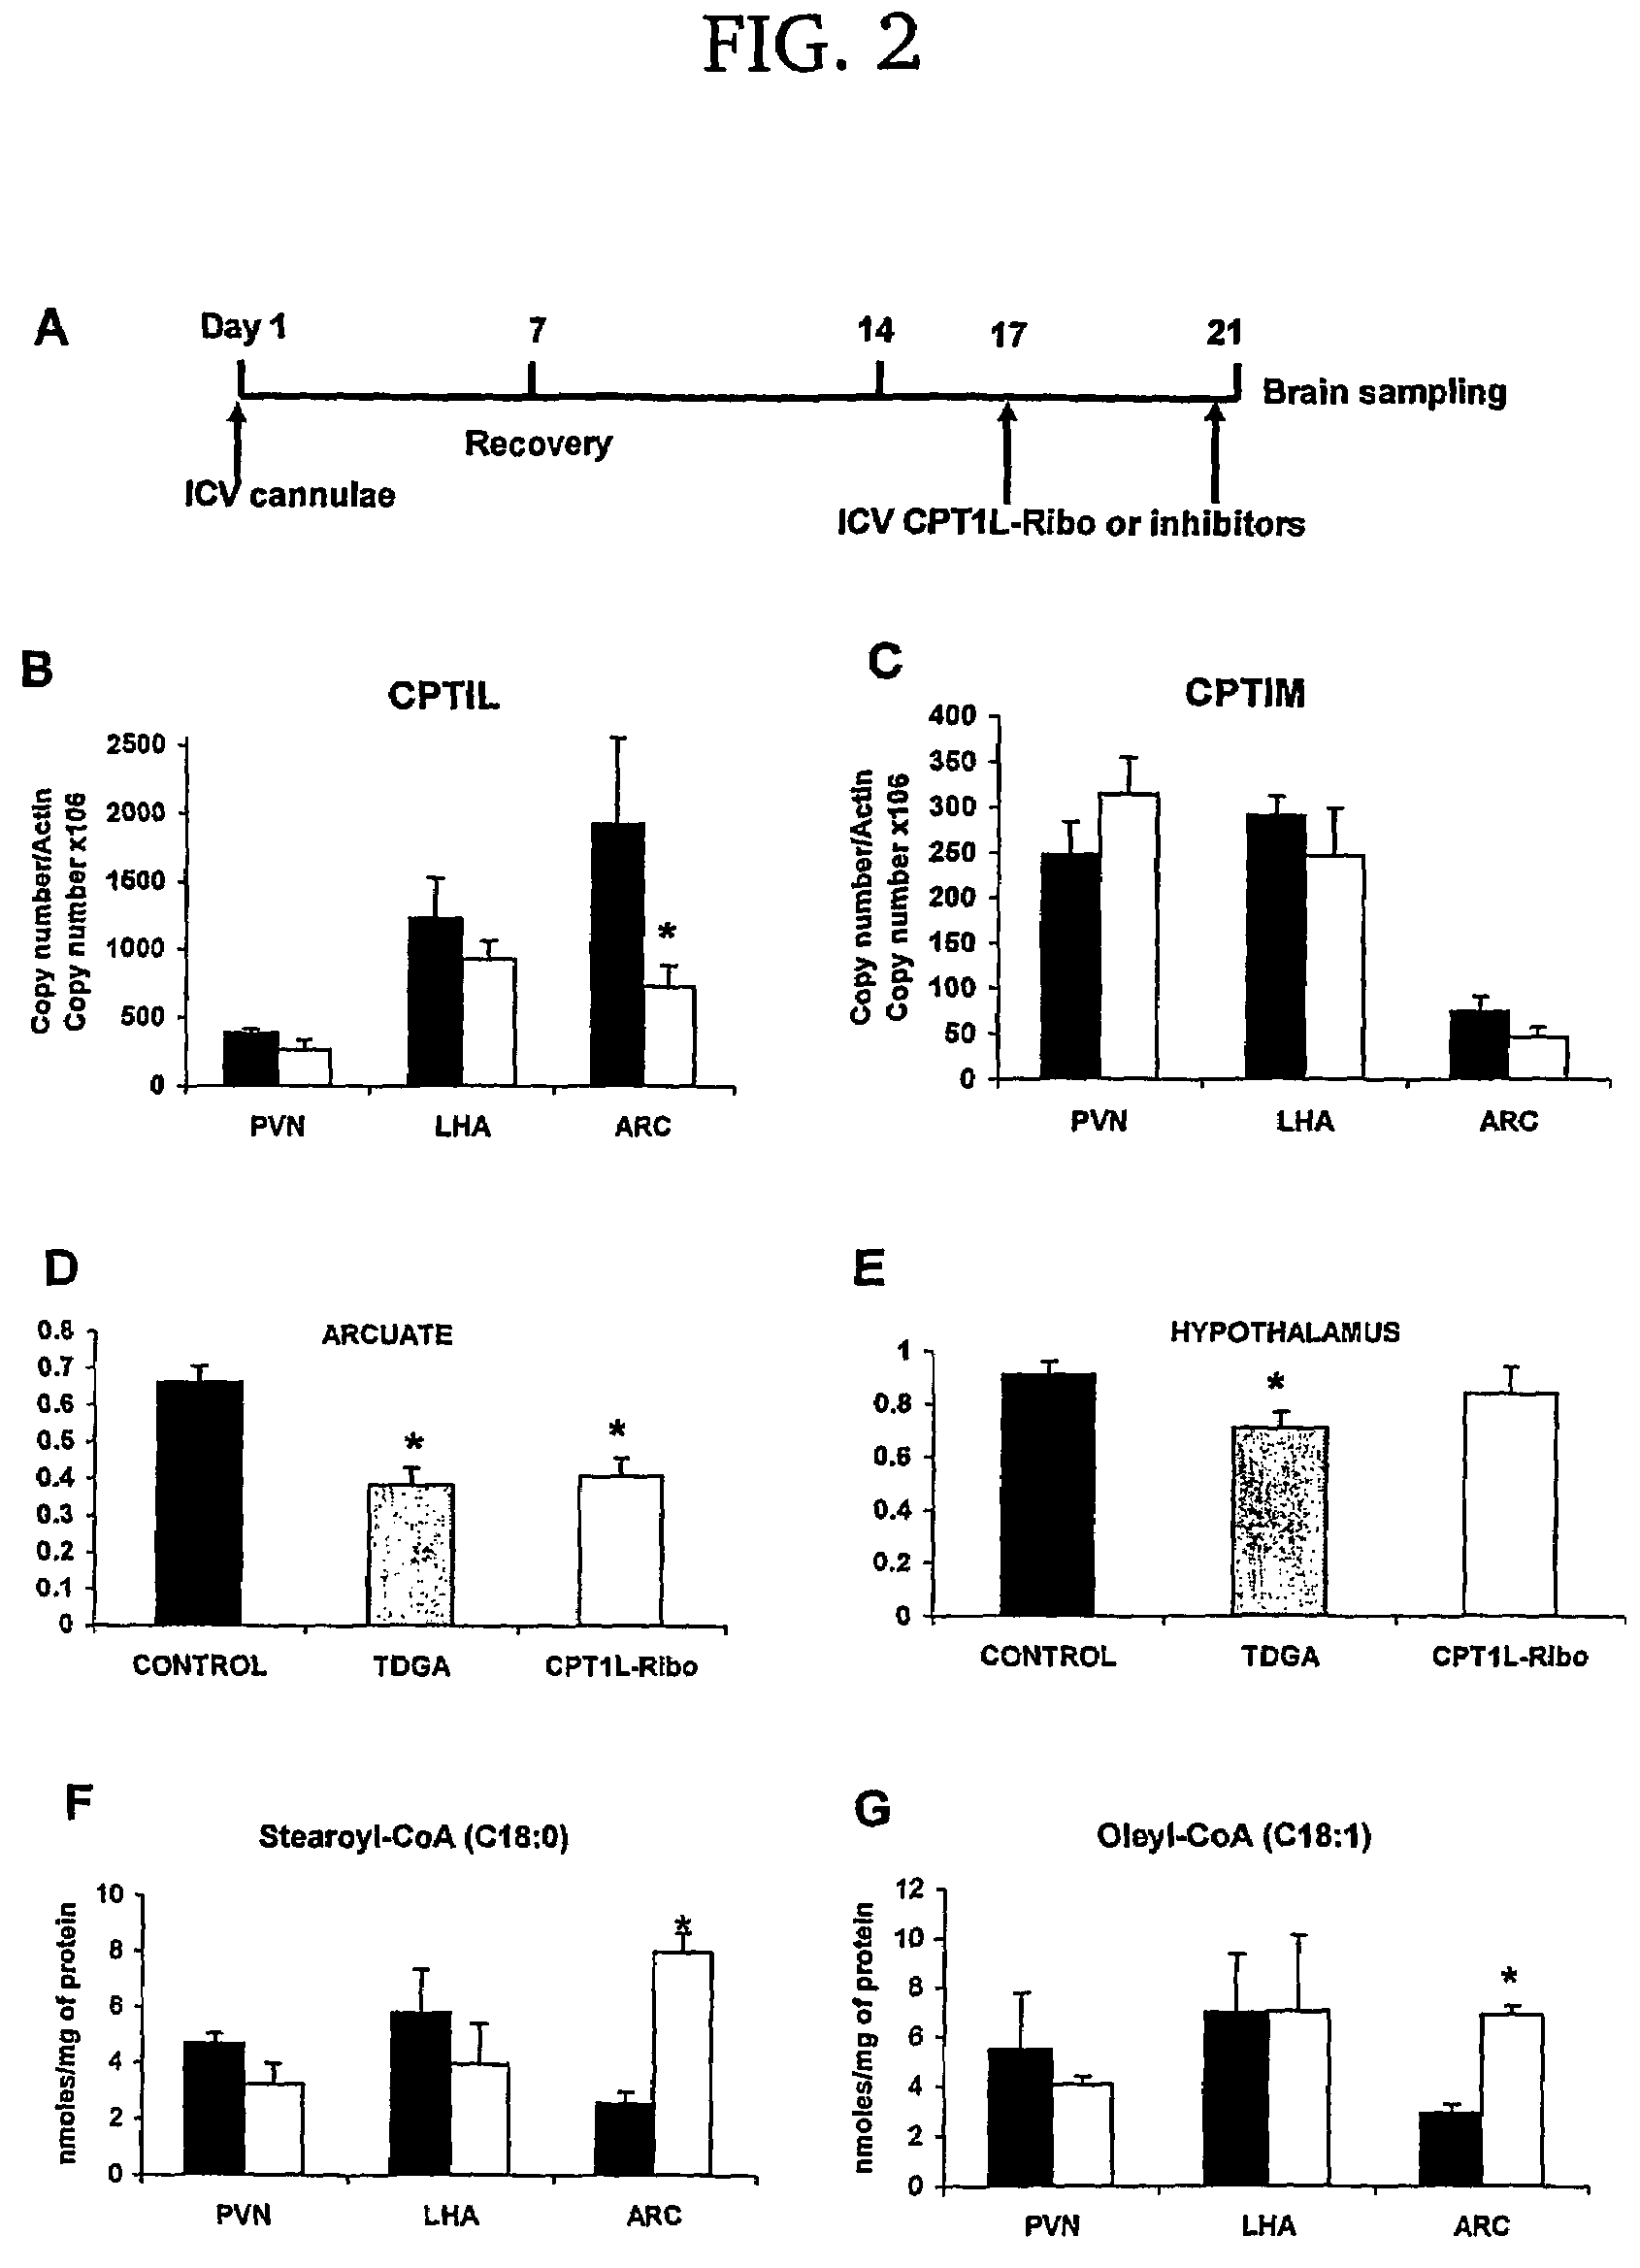 Regulation of food intake by modulation of long-chain fatty acyl-CoA levels in the hypothalamus